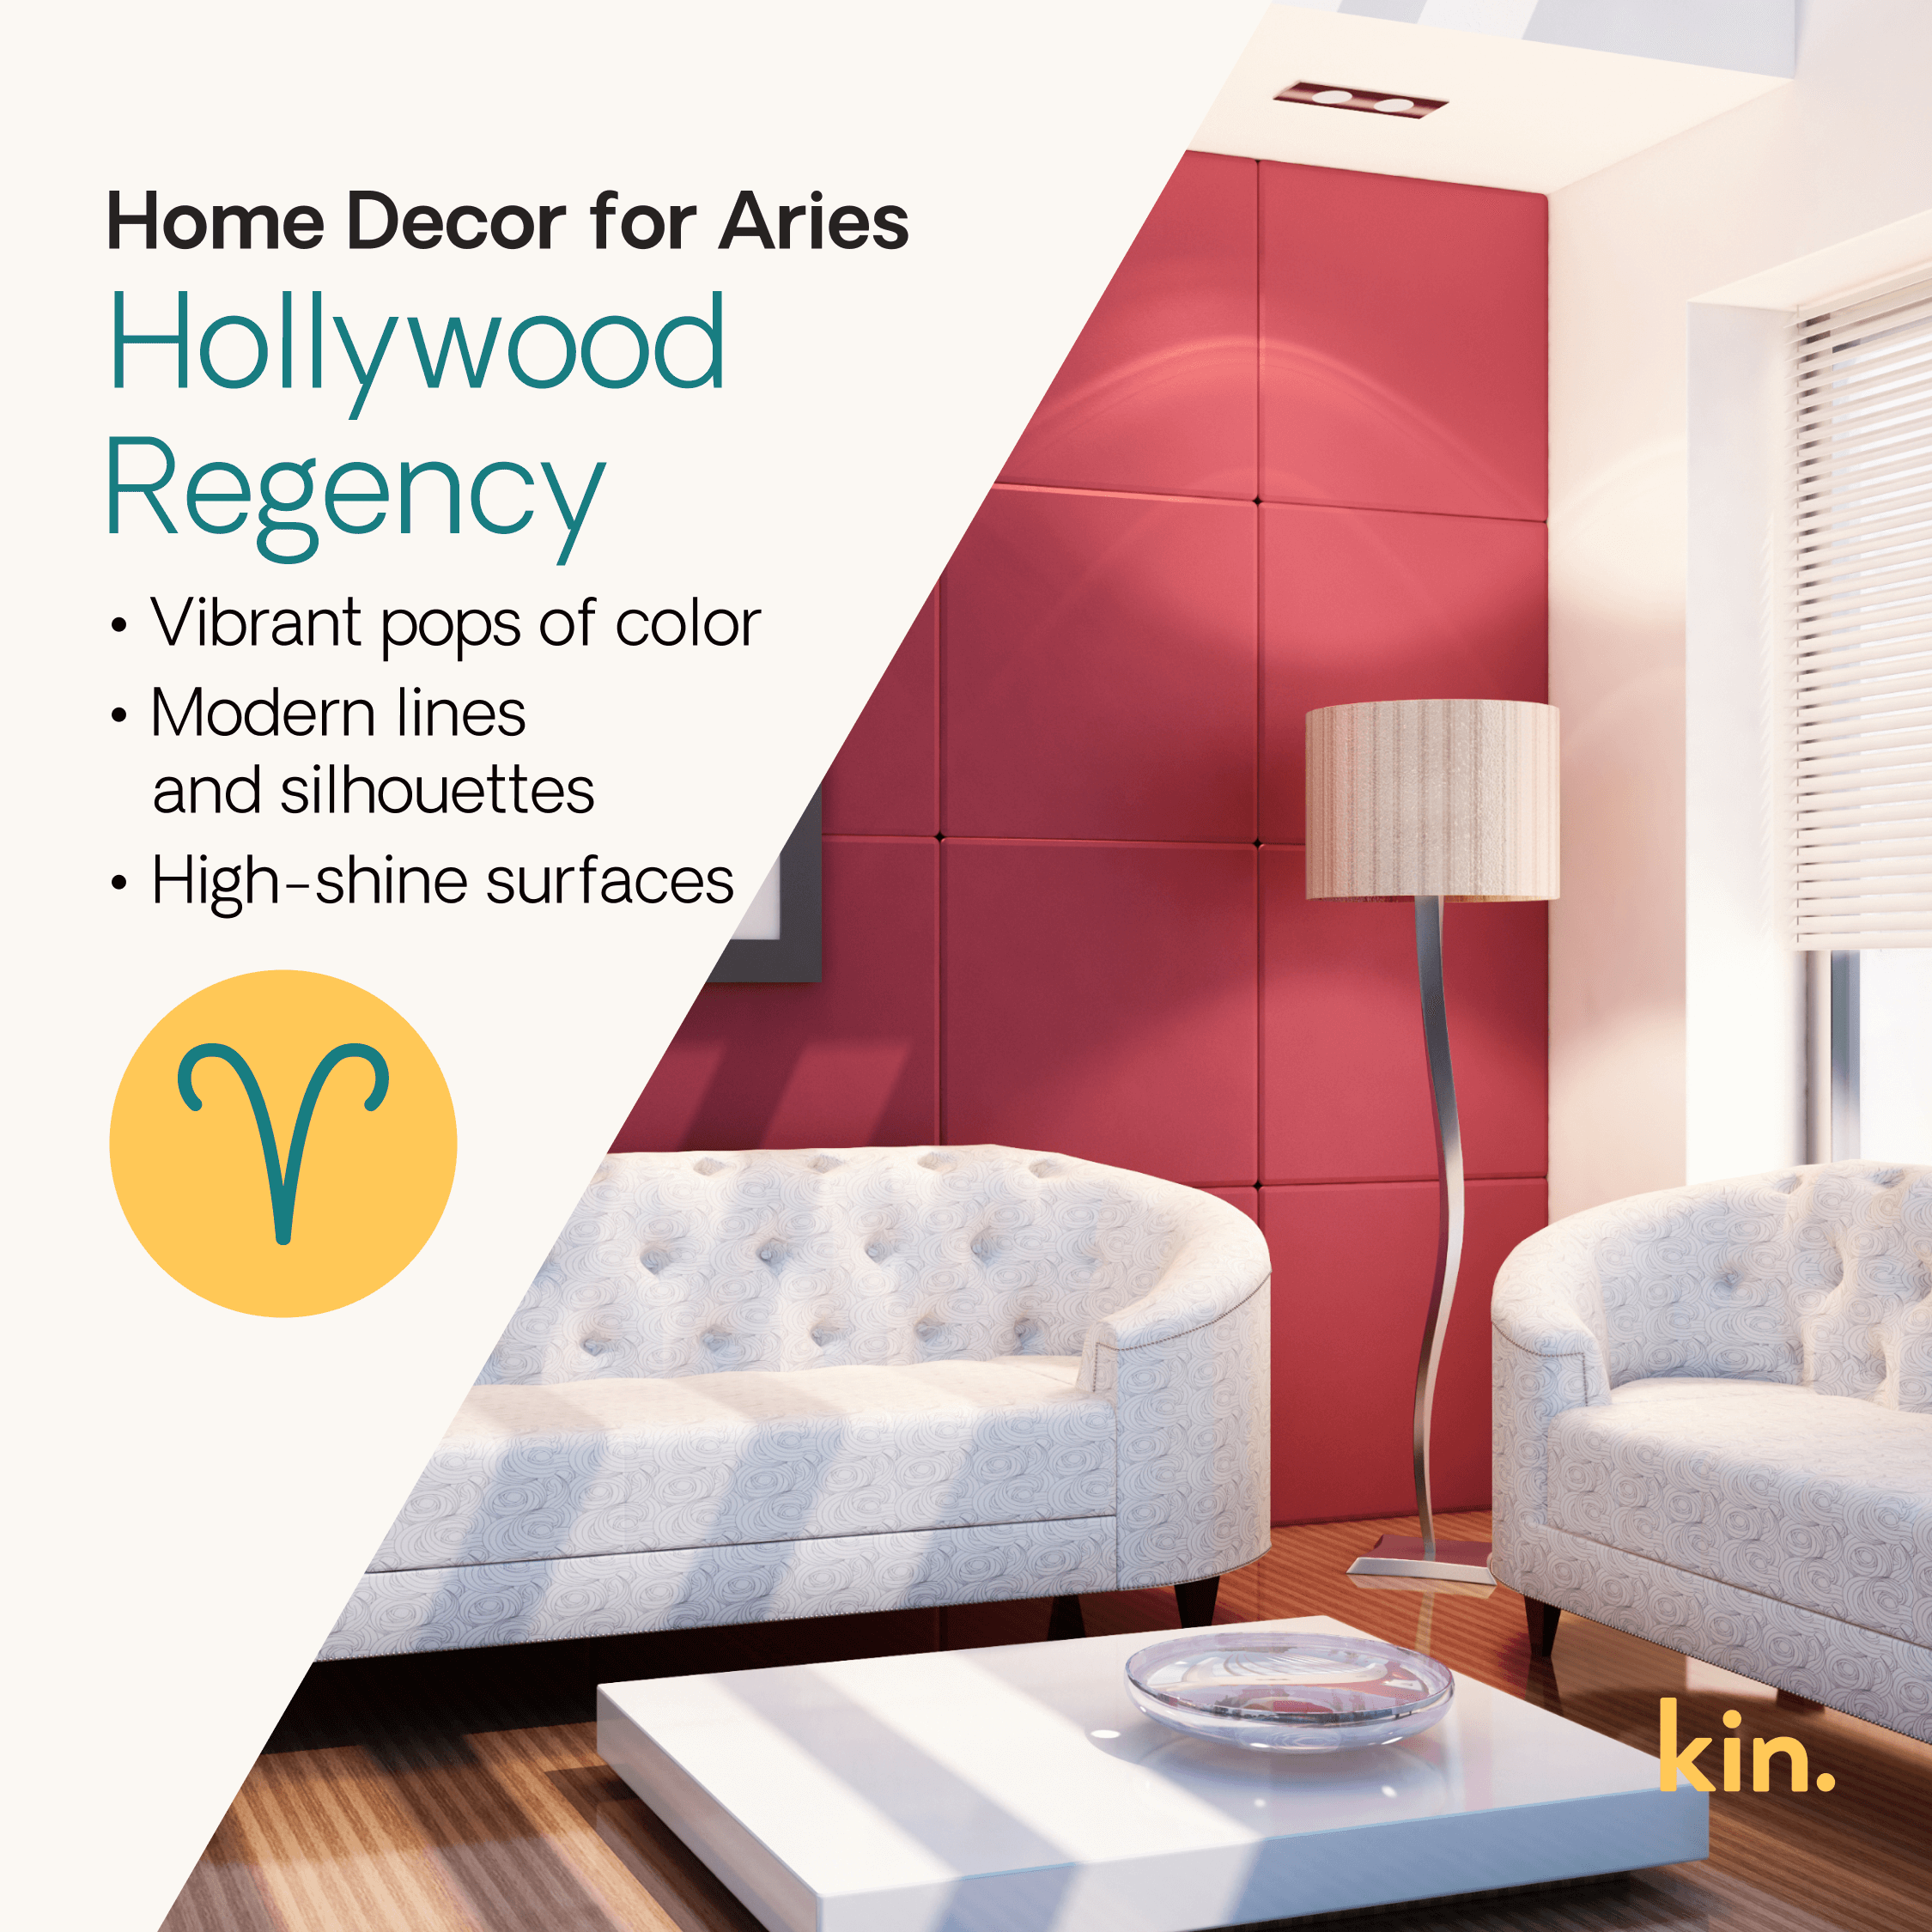 Home Decor for Aries: Hollywood Regency High-shine surfaces  Modern lines and silhouettes Vibrant pops of color